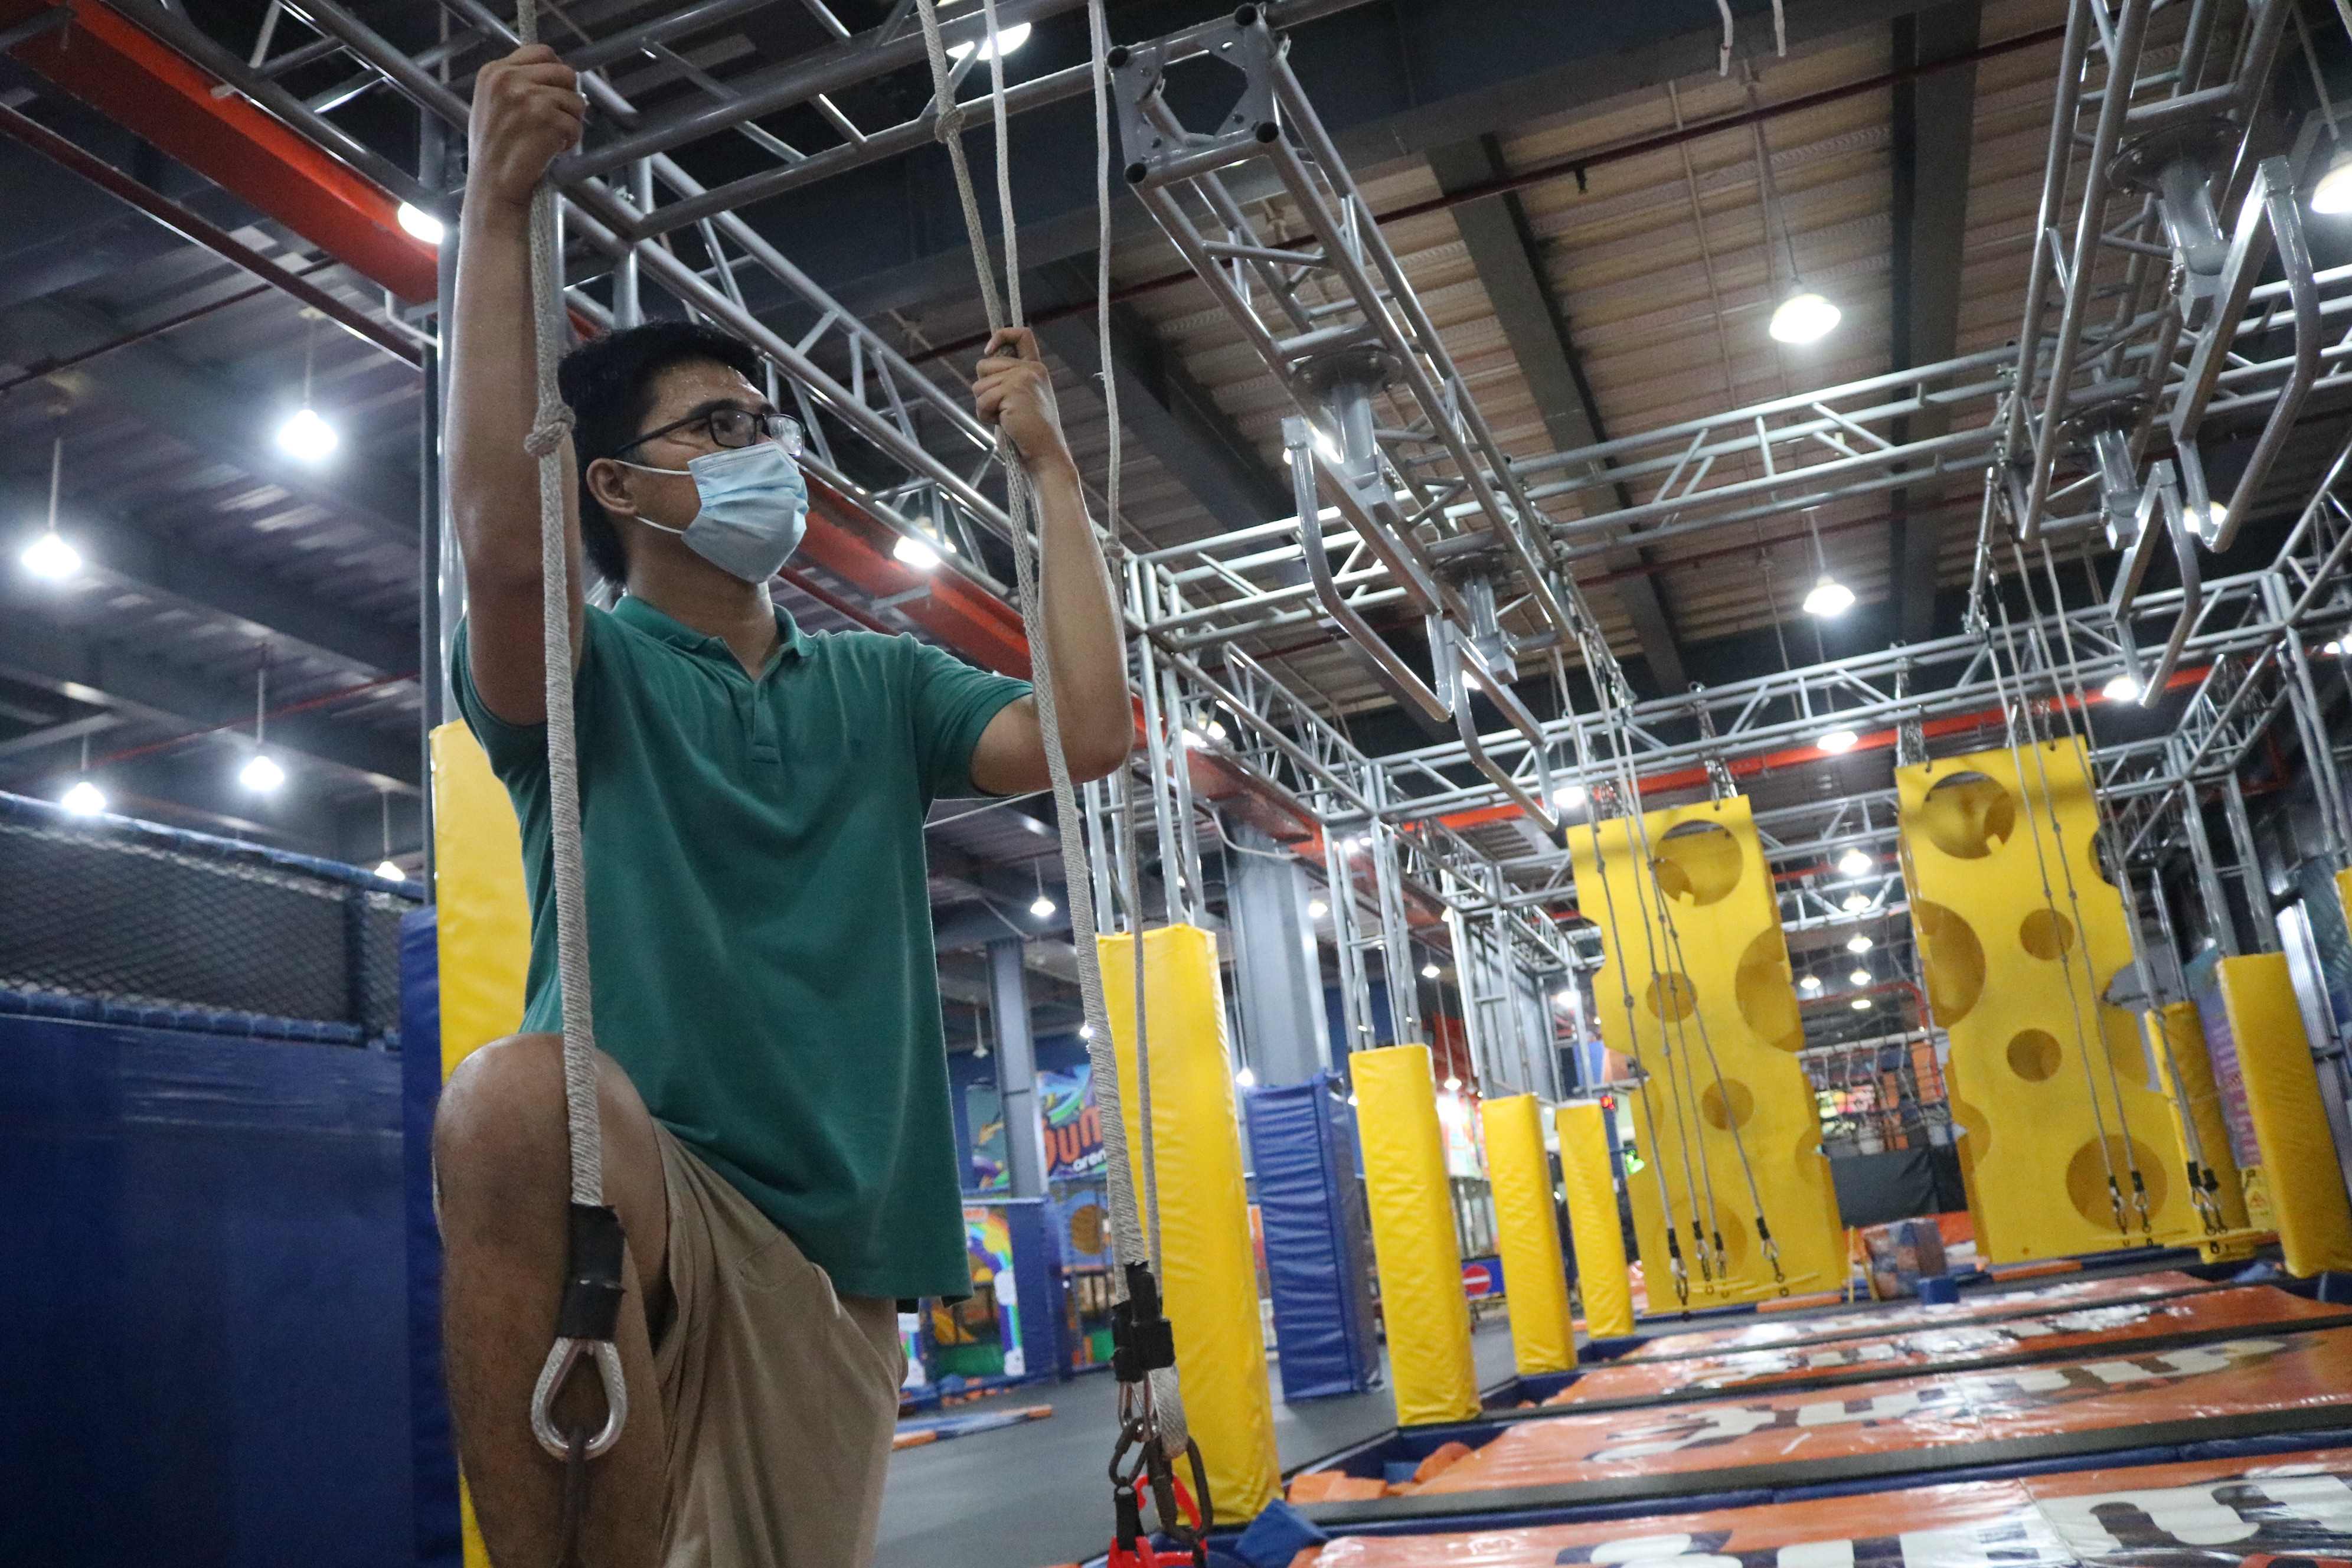 Phu Vinh, from Thu Duc City, attempts to conquer an obstacle on the ninja challenge course at Jump Arena in District 7, Ho Chi Minh City on November 20, 2021. Photo: Hoang An / Tuoi Tre News